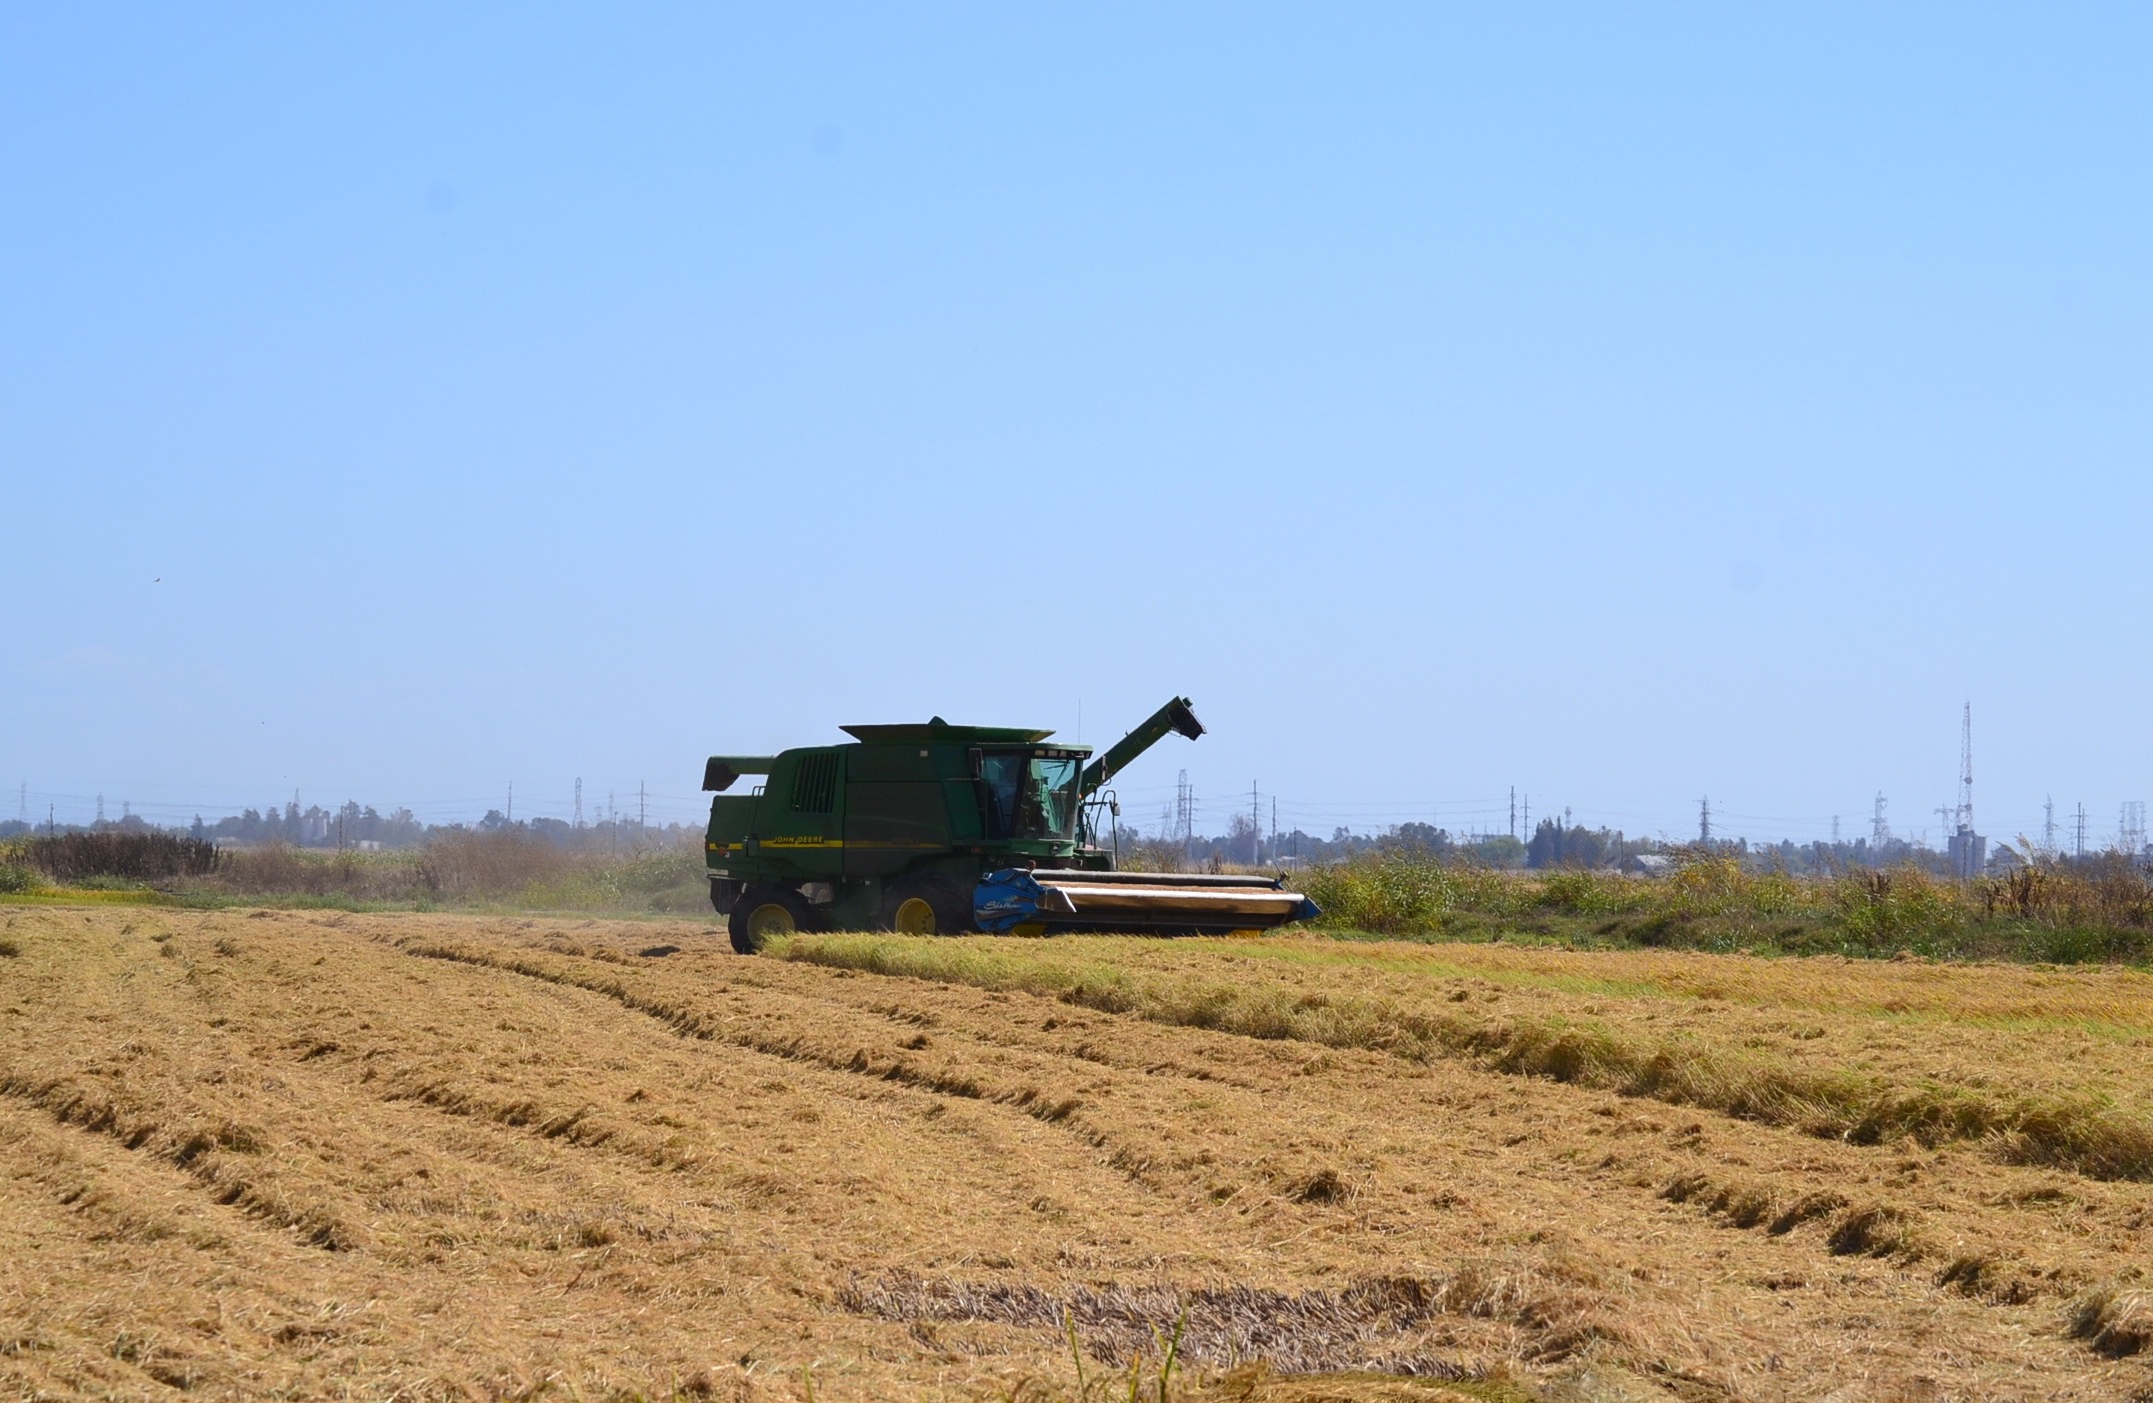 rice harvester in the distance at work in a rice field at the Conservancy